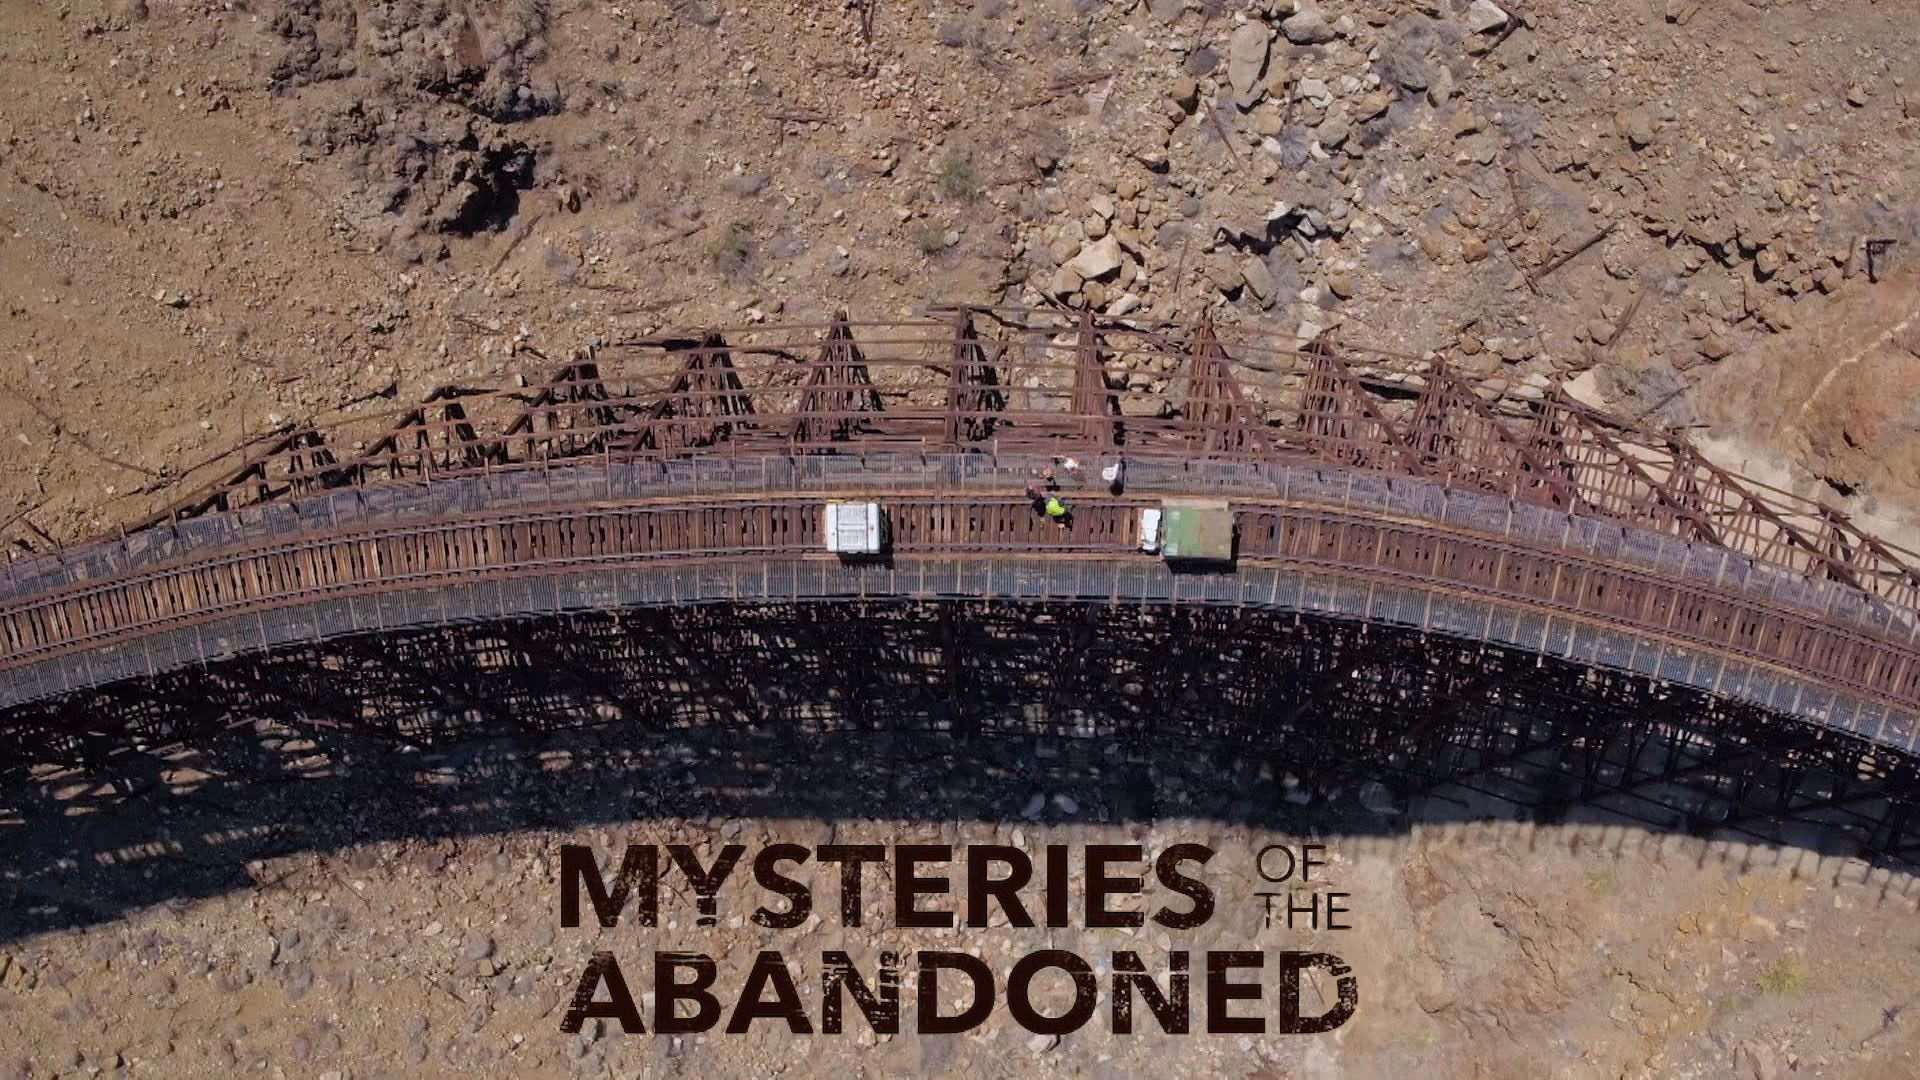 Show Mysteries of the Abandoned